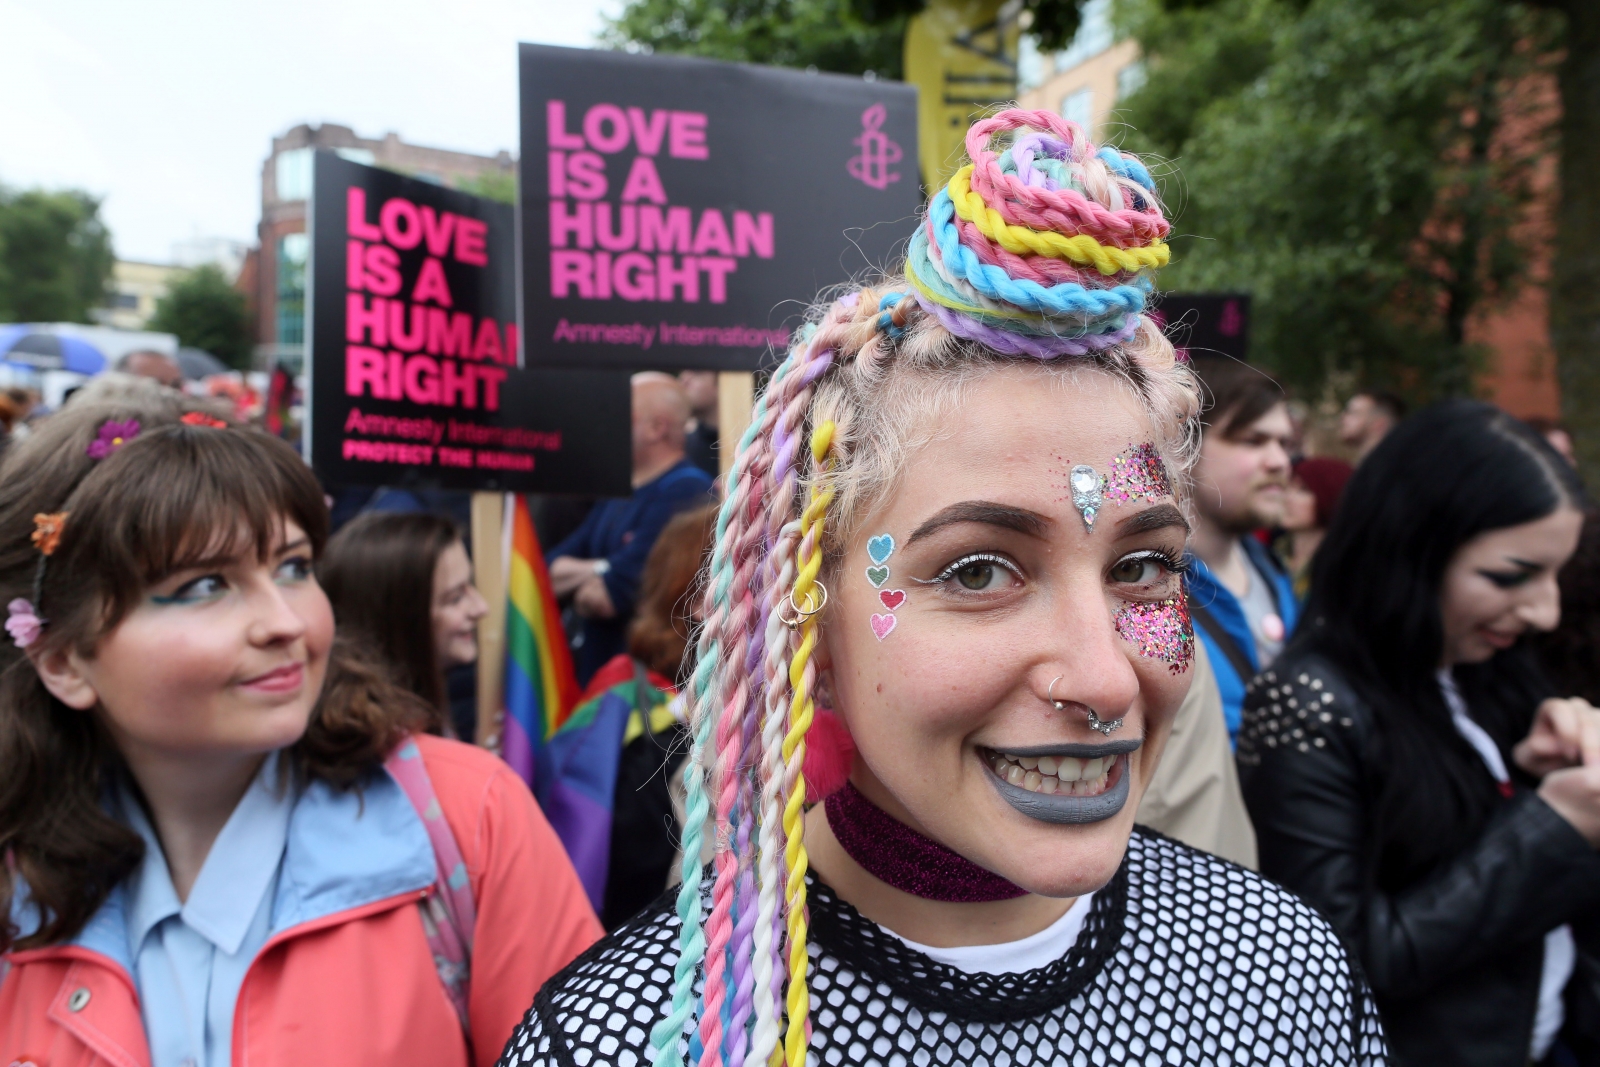 Northern Ireland Gay Rights Thousands March In Belfast Calling For